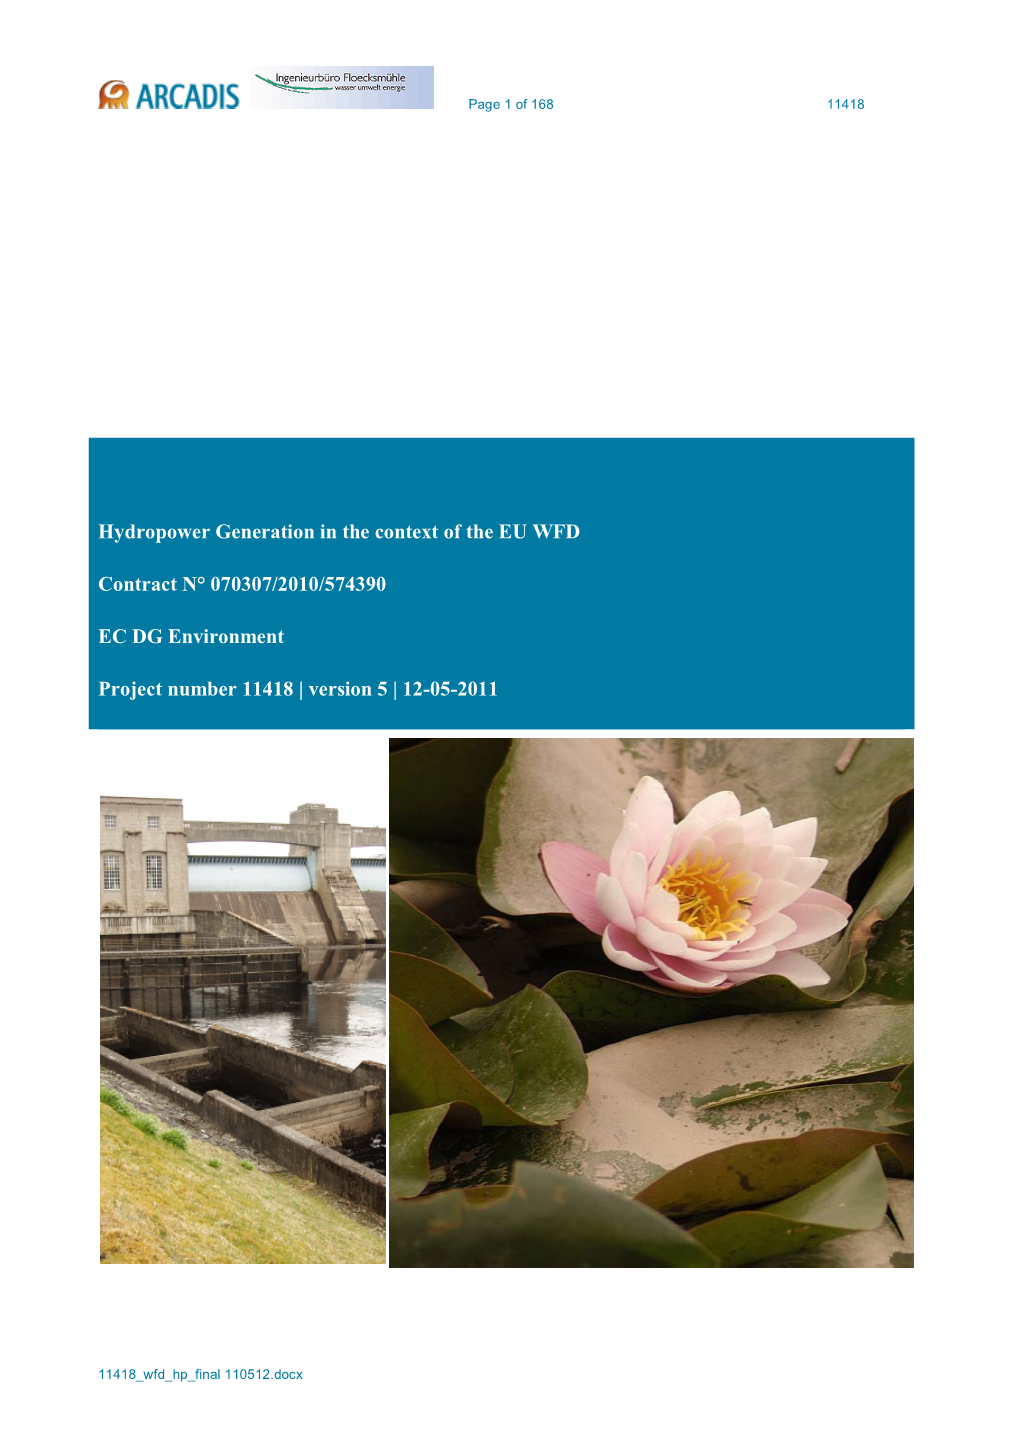 Hydropower Generation in the Context of the EU WFD Contract N° 070307